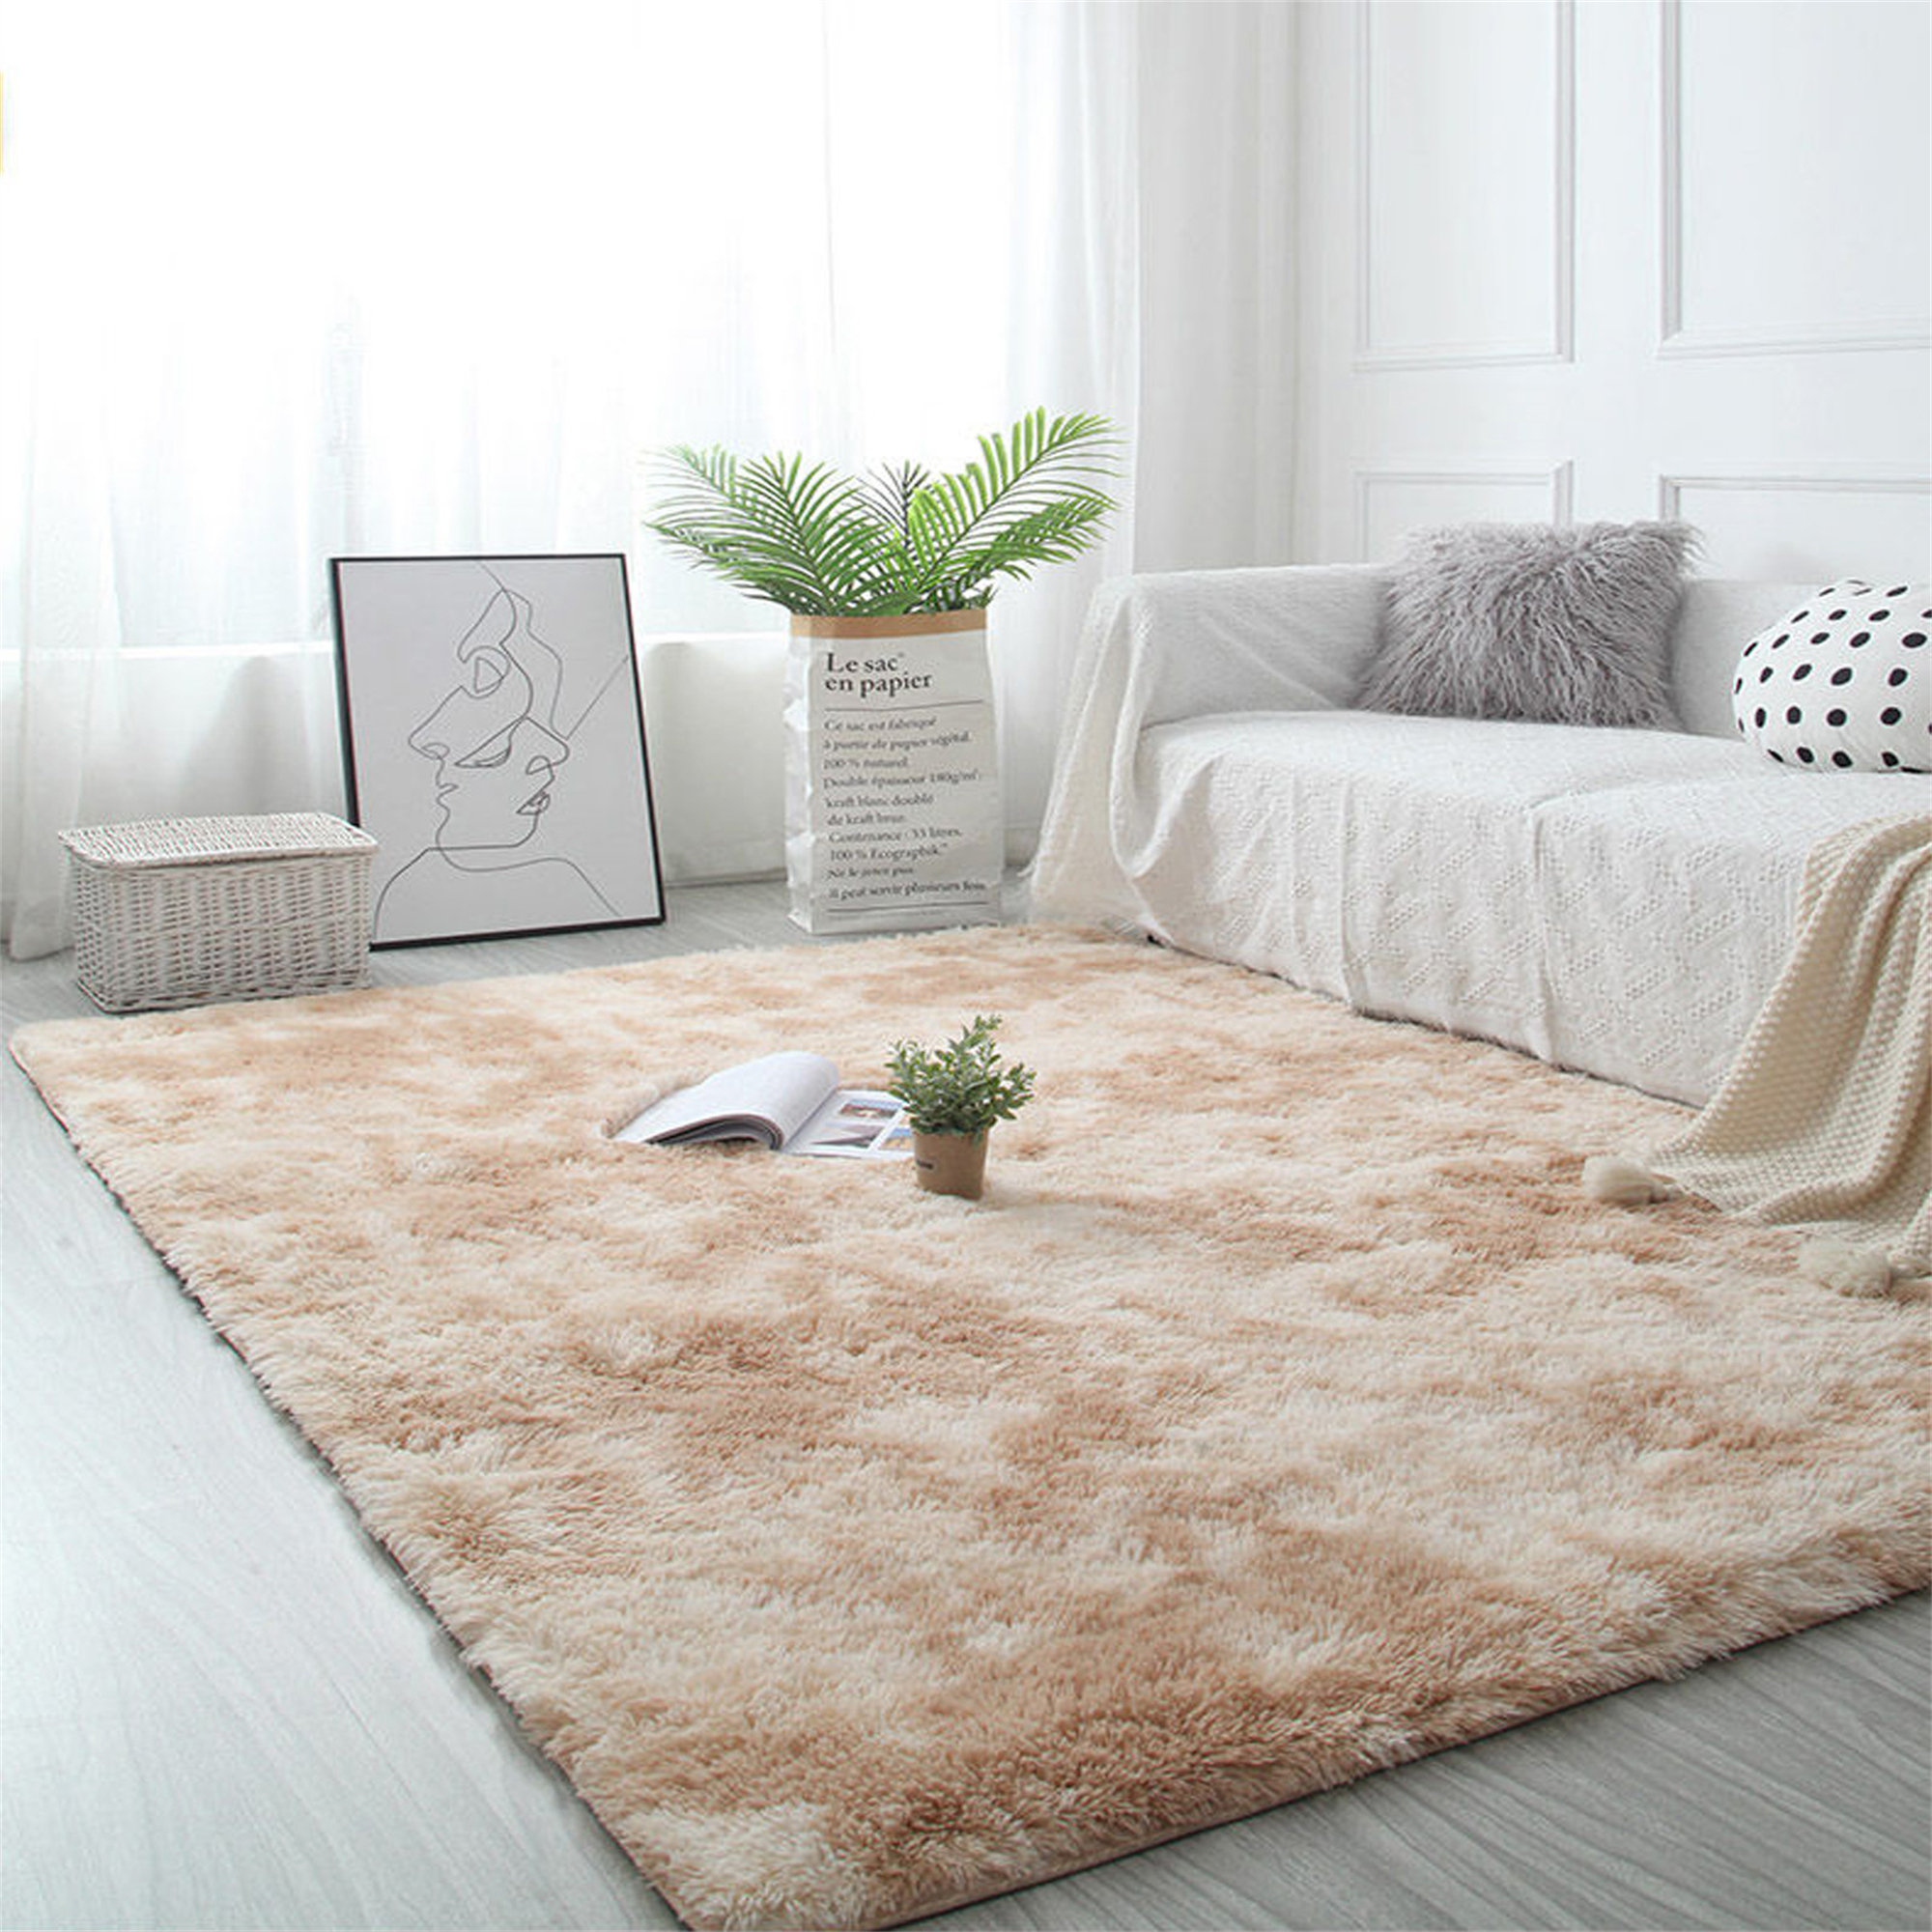 NK DECORATION Fluffy Rugs Clearance Living Room Rugs Bedroom Rugs,Non-Slip  Area Rug Shaggy Tie-dye Rugs for Living Room Modern Indoor Home Floor